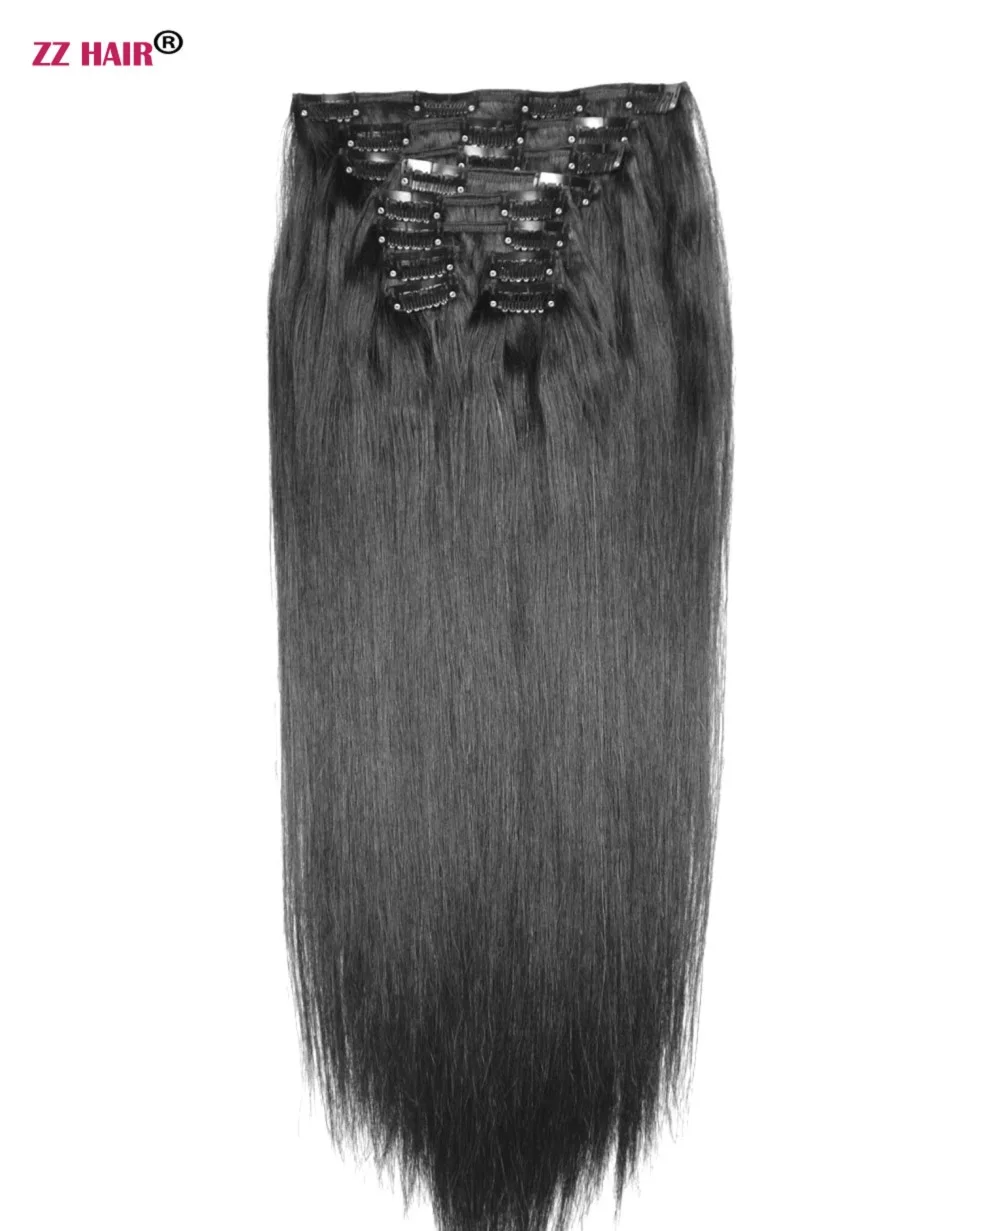 

ZZHAIR 260g-400g 16"-26" Machine Made Remy 10pcs Set Clips In Human Hair Extensions Whole Head Natural Straight